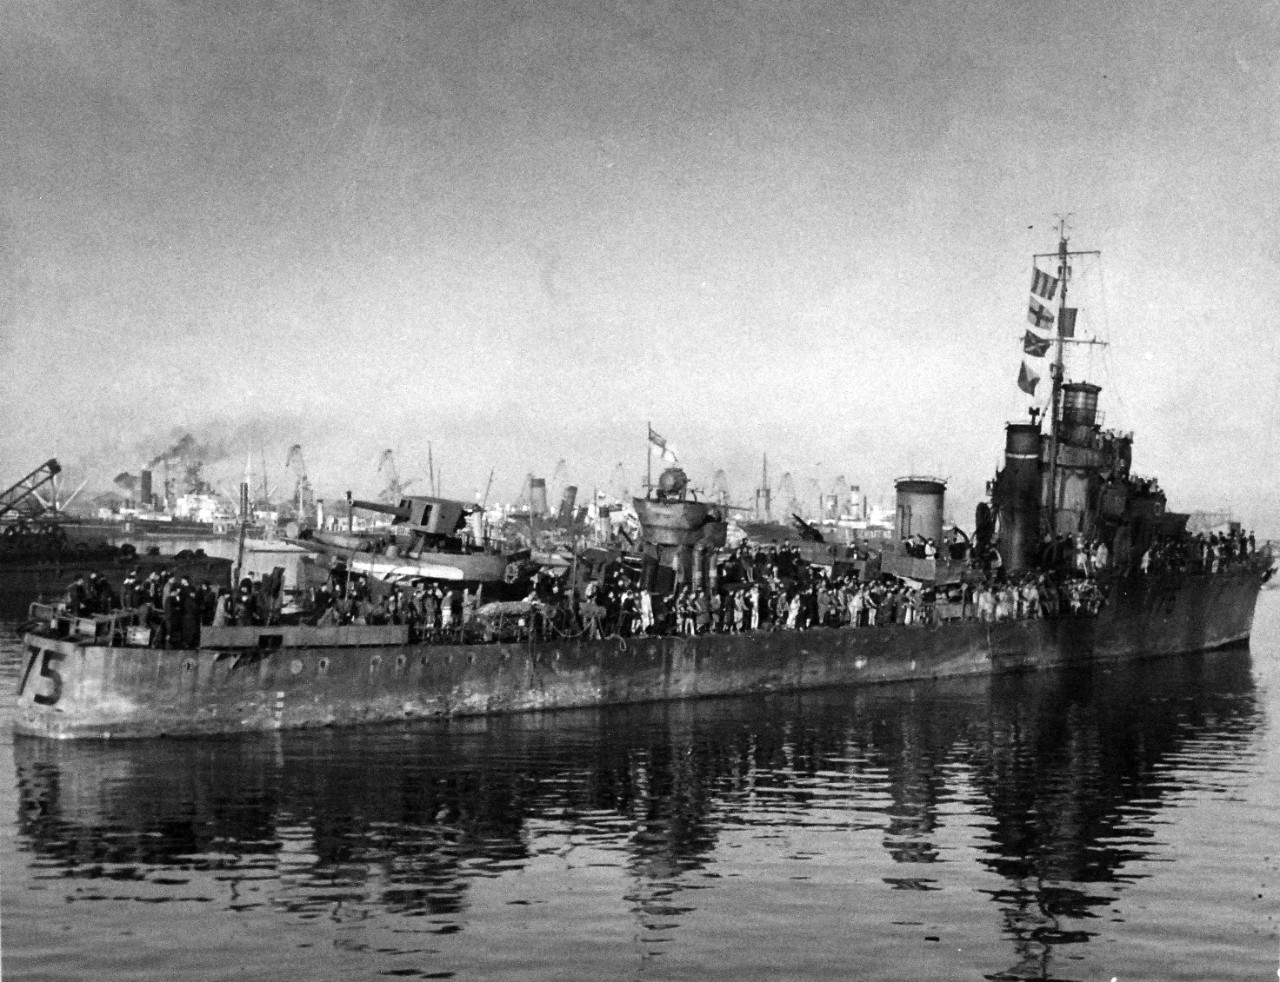 <p>80-G-30679: Naval Battle of Casablanca, November 1942. Royal Navy ship, HMS Venomous (D 75), with survivors of HMS Hecla at Casablanca, Morocco, November 17, 1942. Hecla was a destroyer depot ship and was sunk during this operation on November 12, 1942 by German submarine U-515.(9/22/2015).</p>
